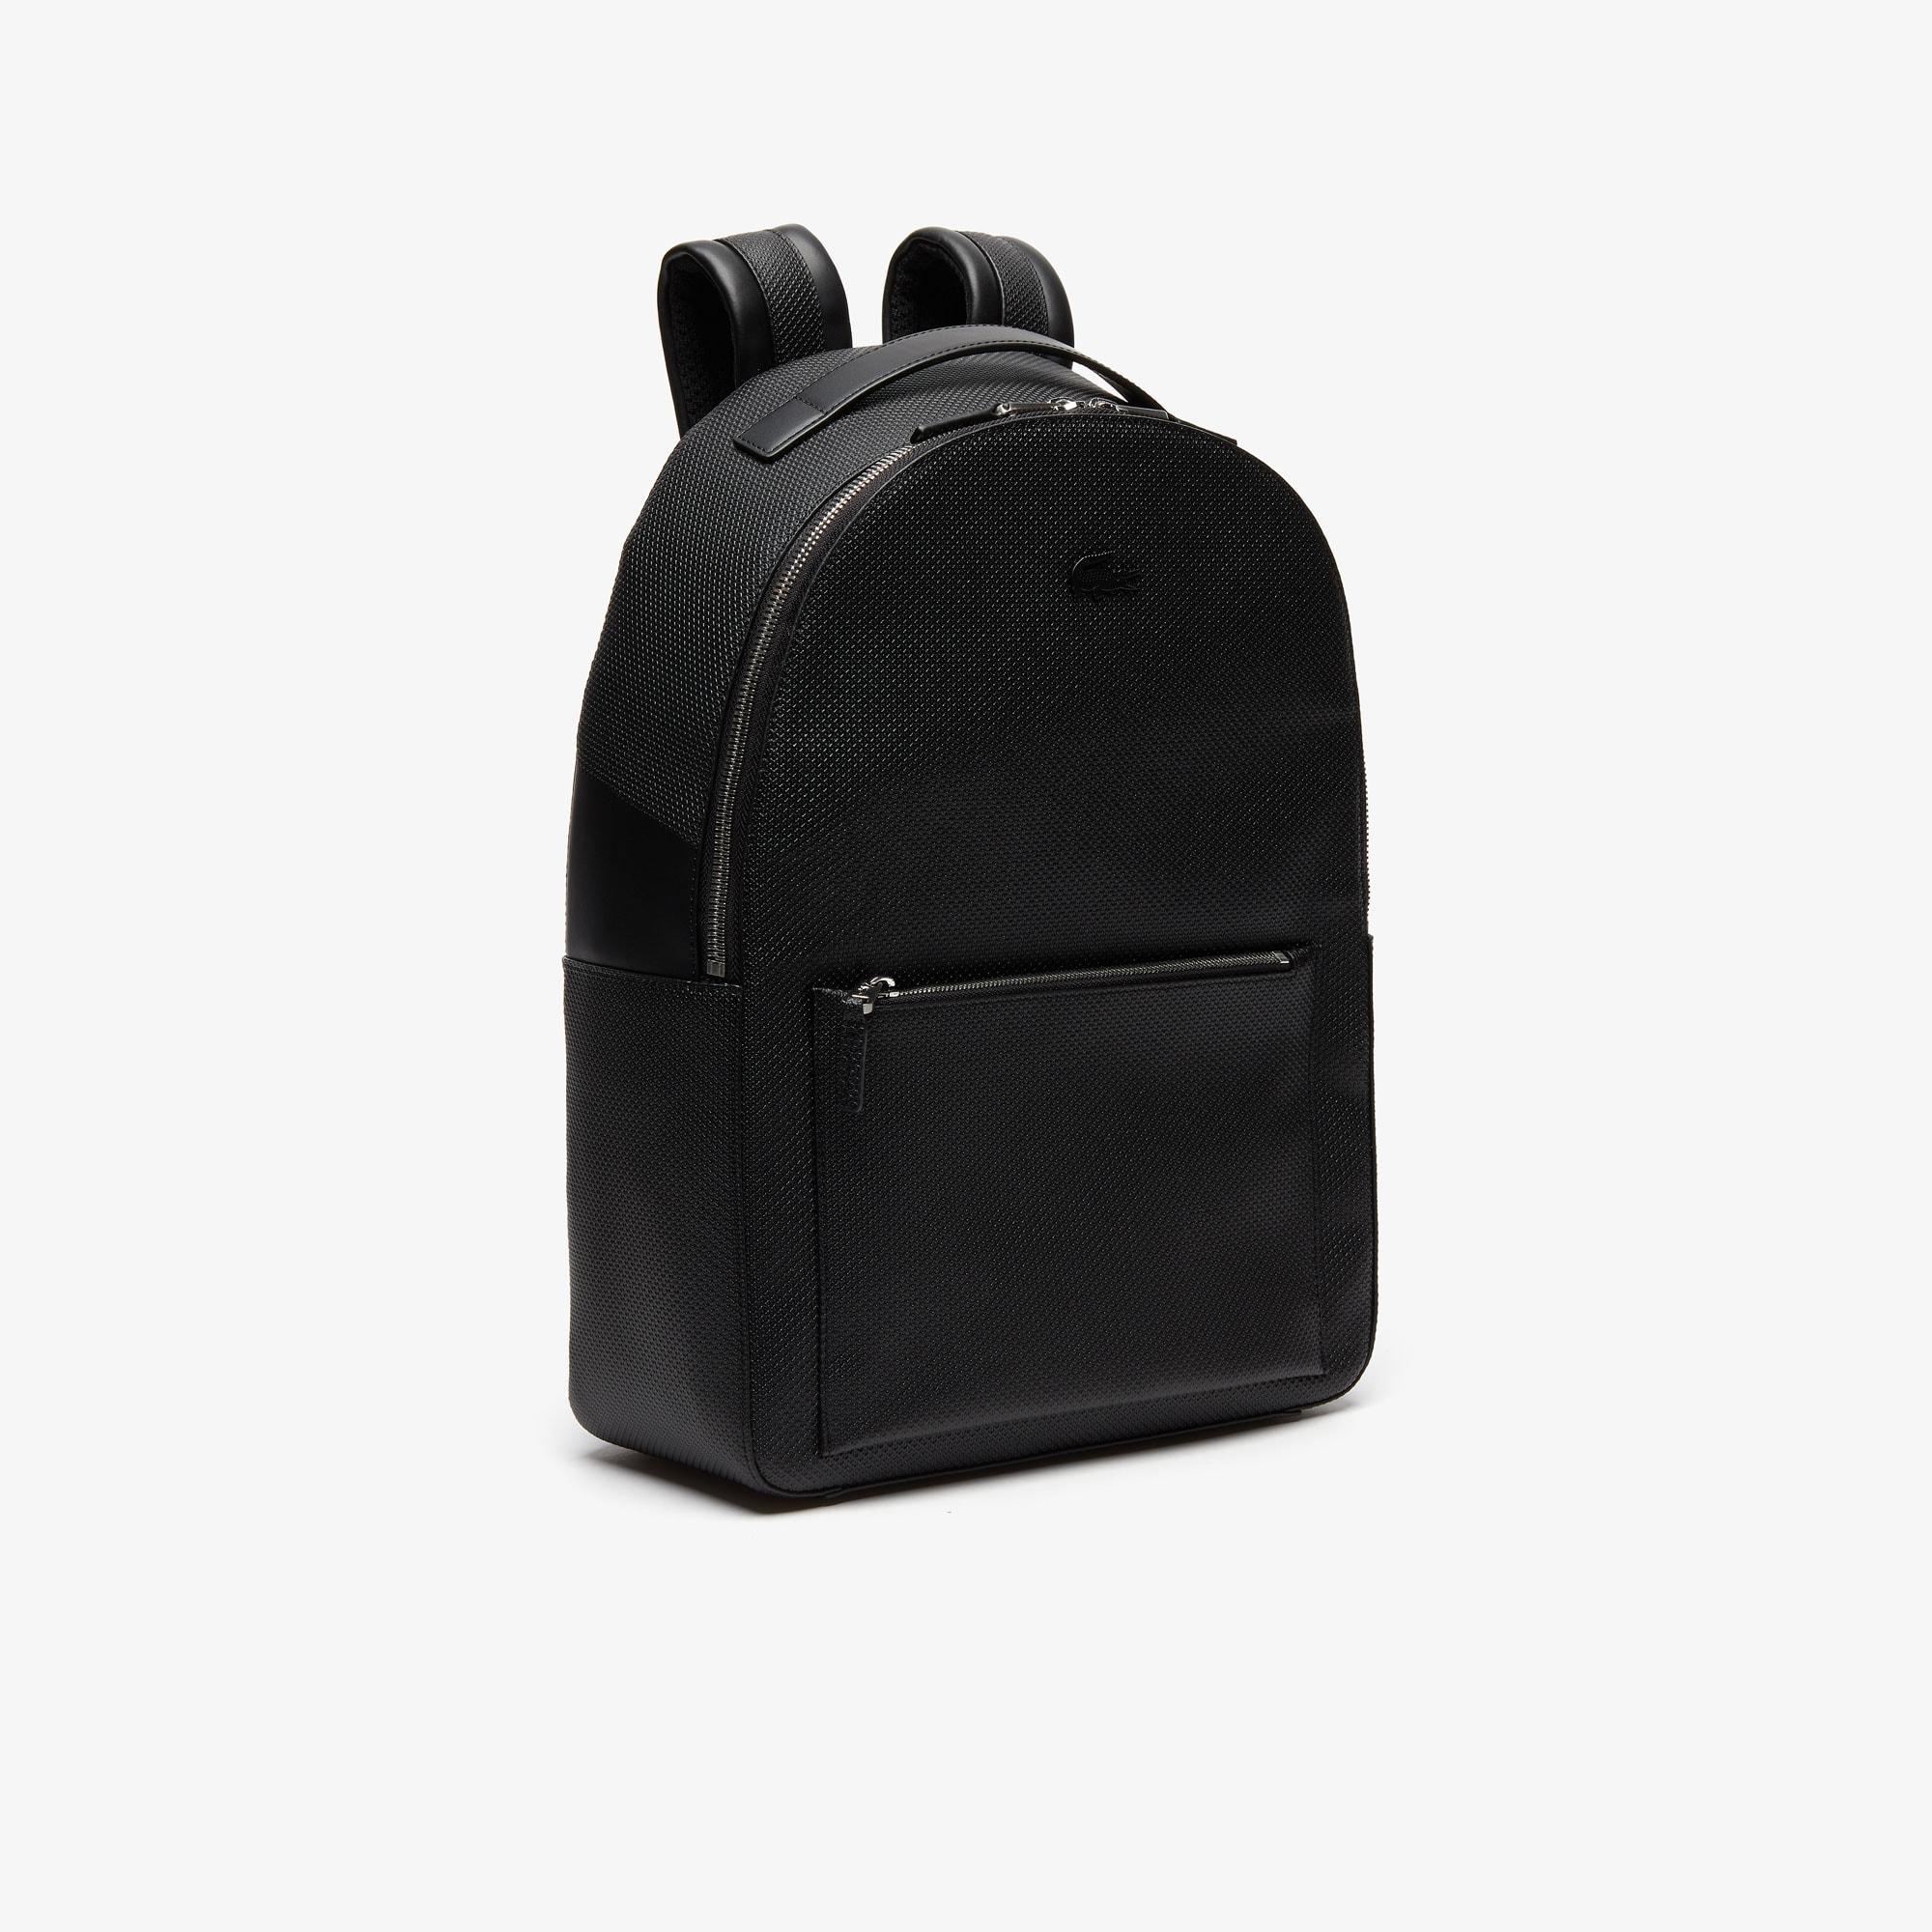 leather lacoste bag